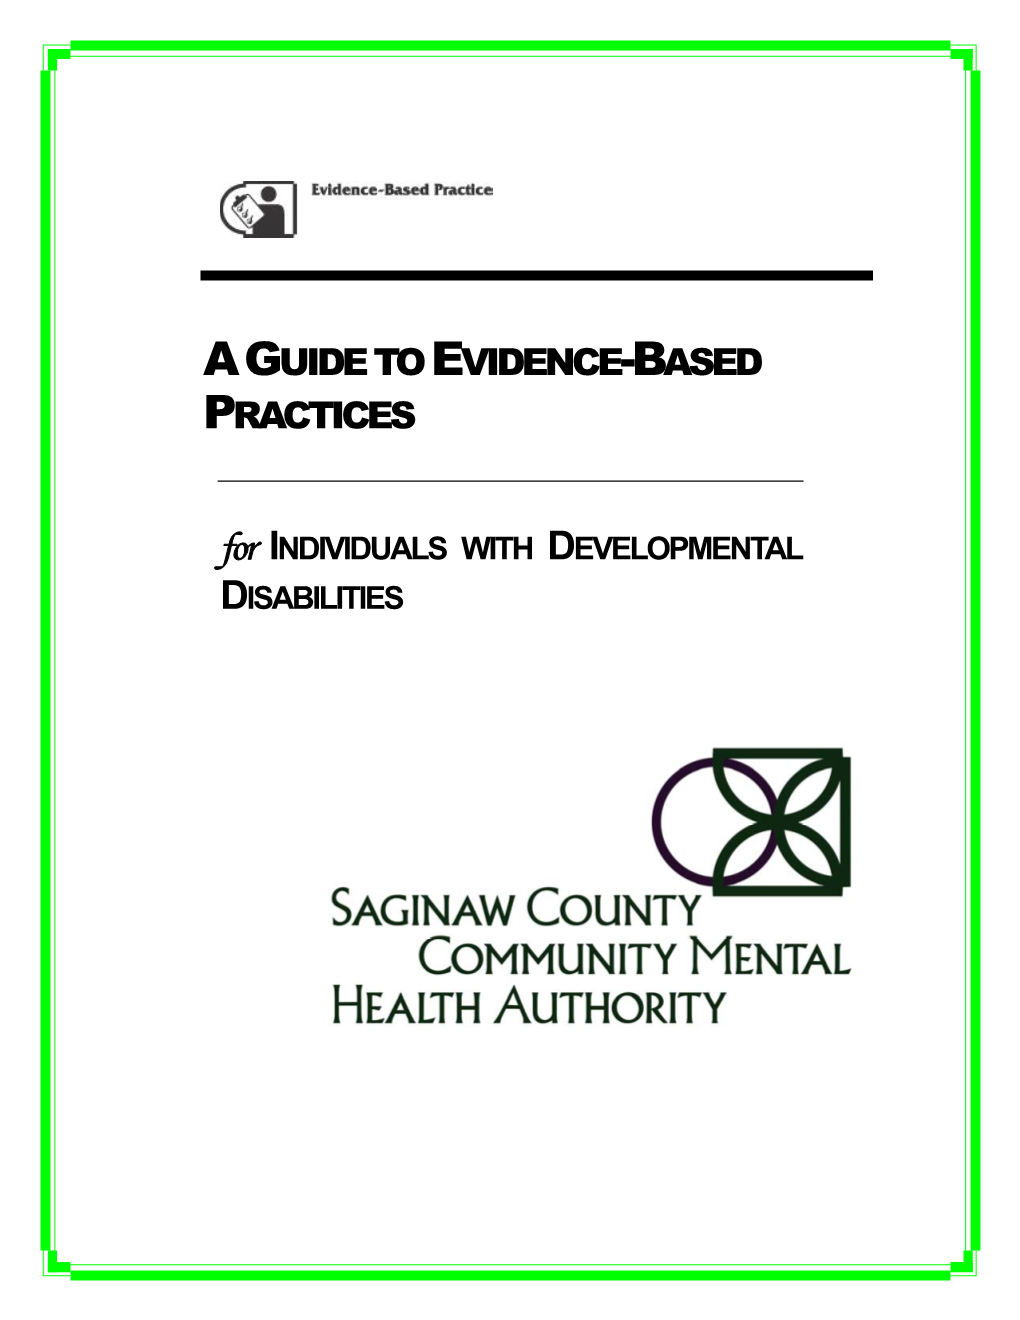 Aguide to Evidence-Based Practices